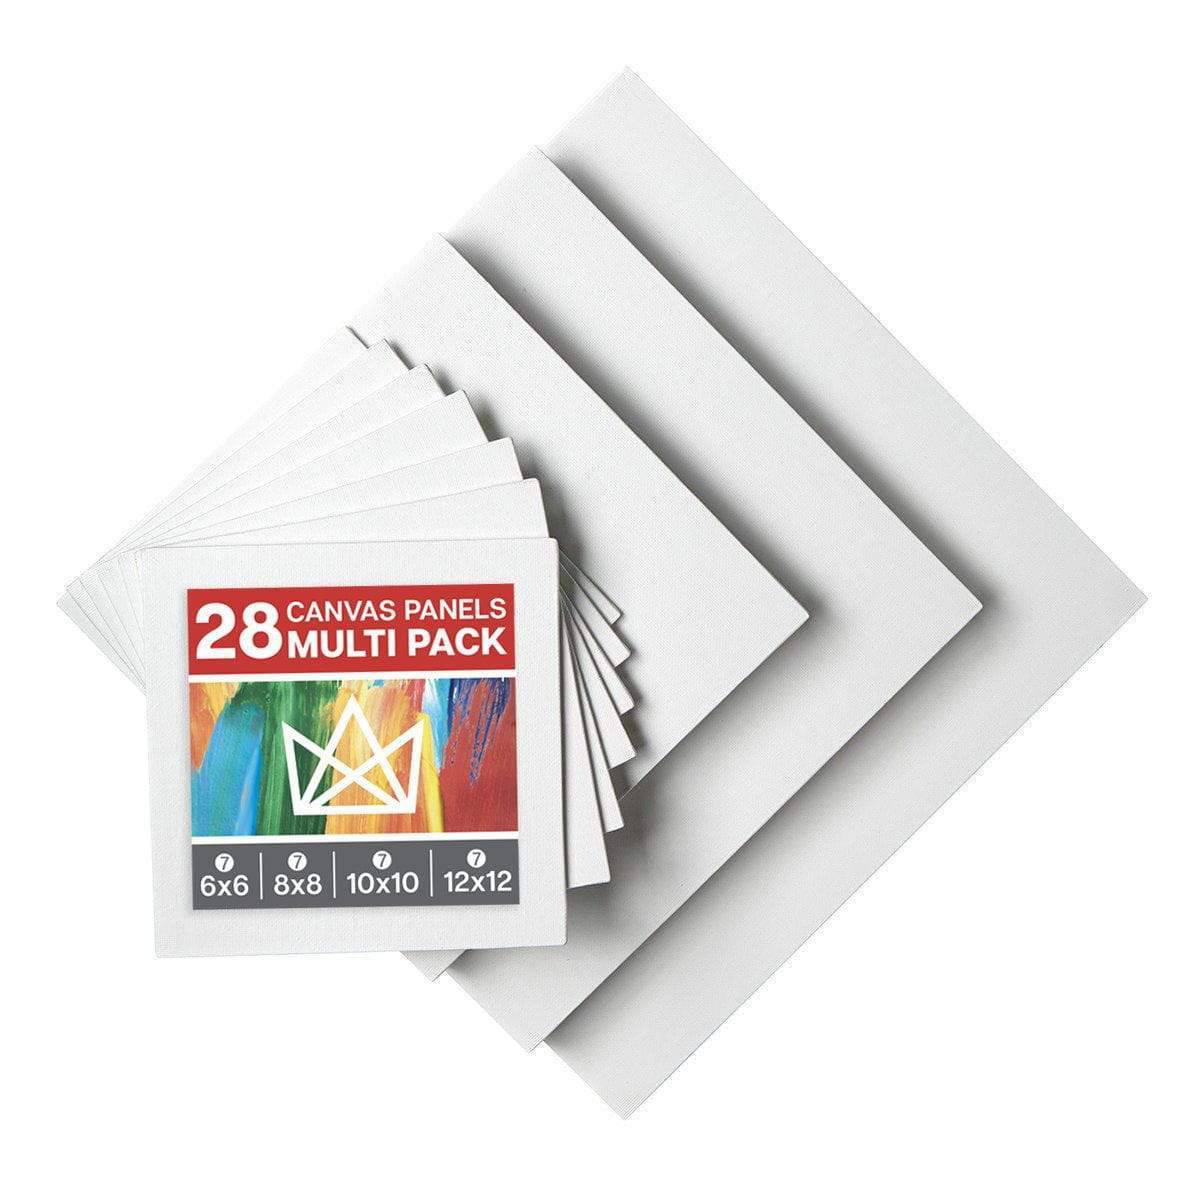 FIXSMITH Painting Canvas Panels Multi Pack- 6x6,8x8,10x10,12x12 (8 of Each),32 Pack,100% Cotton,Primed White Canvases,for Acrylic,Oil,Other Wet or